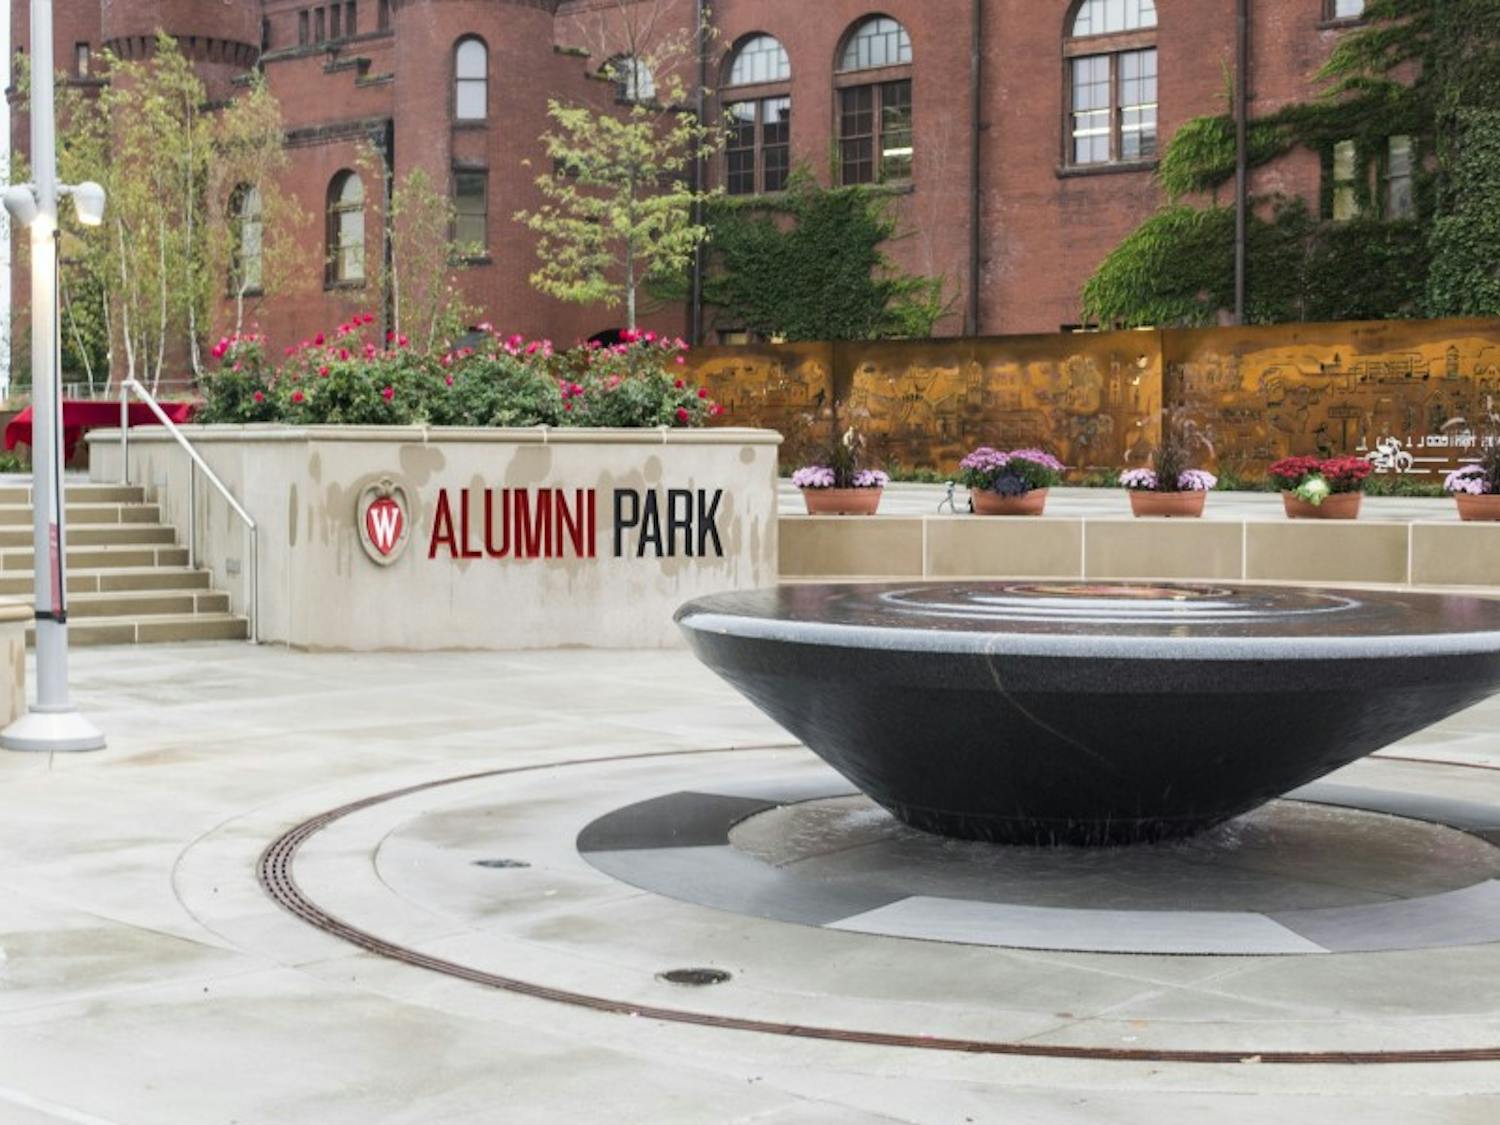 SmithGroupJJR &mdash; the design firm that served as the lead park designer for Alumni Park &mdash; received an award Thursday from the Wisconsin Chapter of the American Society of Landscape Architects for the planning and design of the new park space.